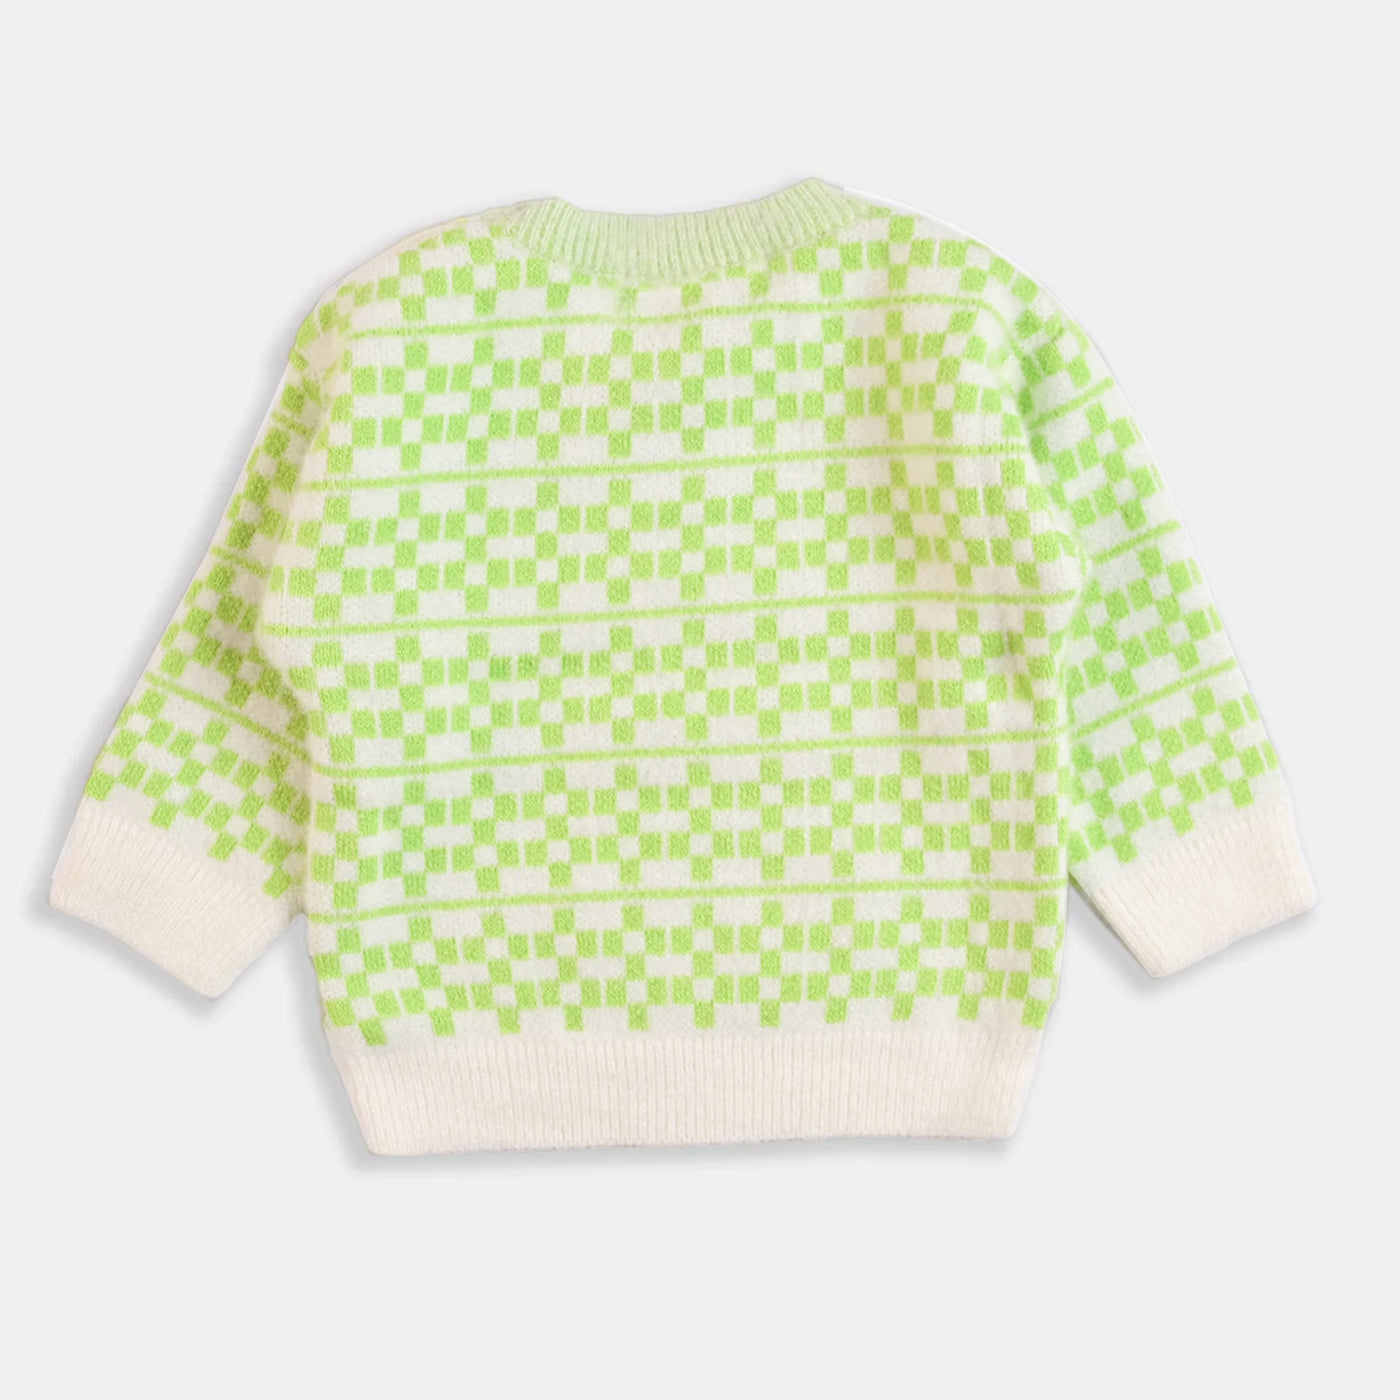 Infant Boys Sweater Green and White